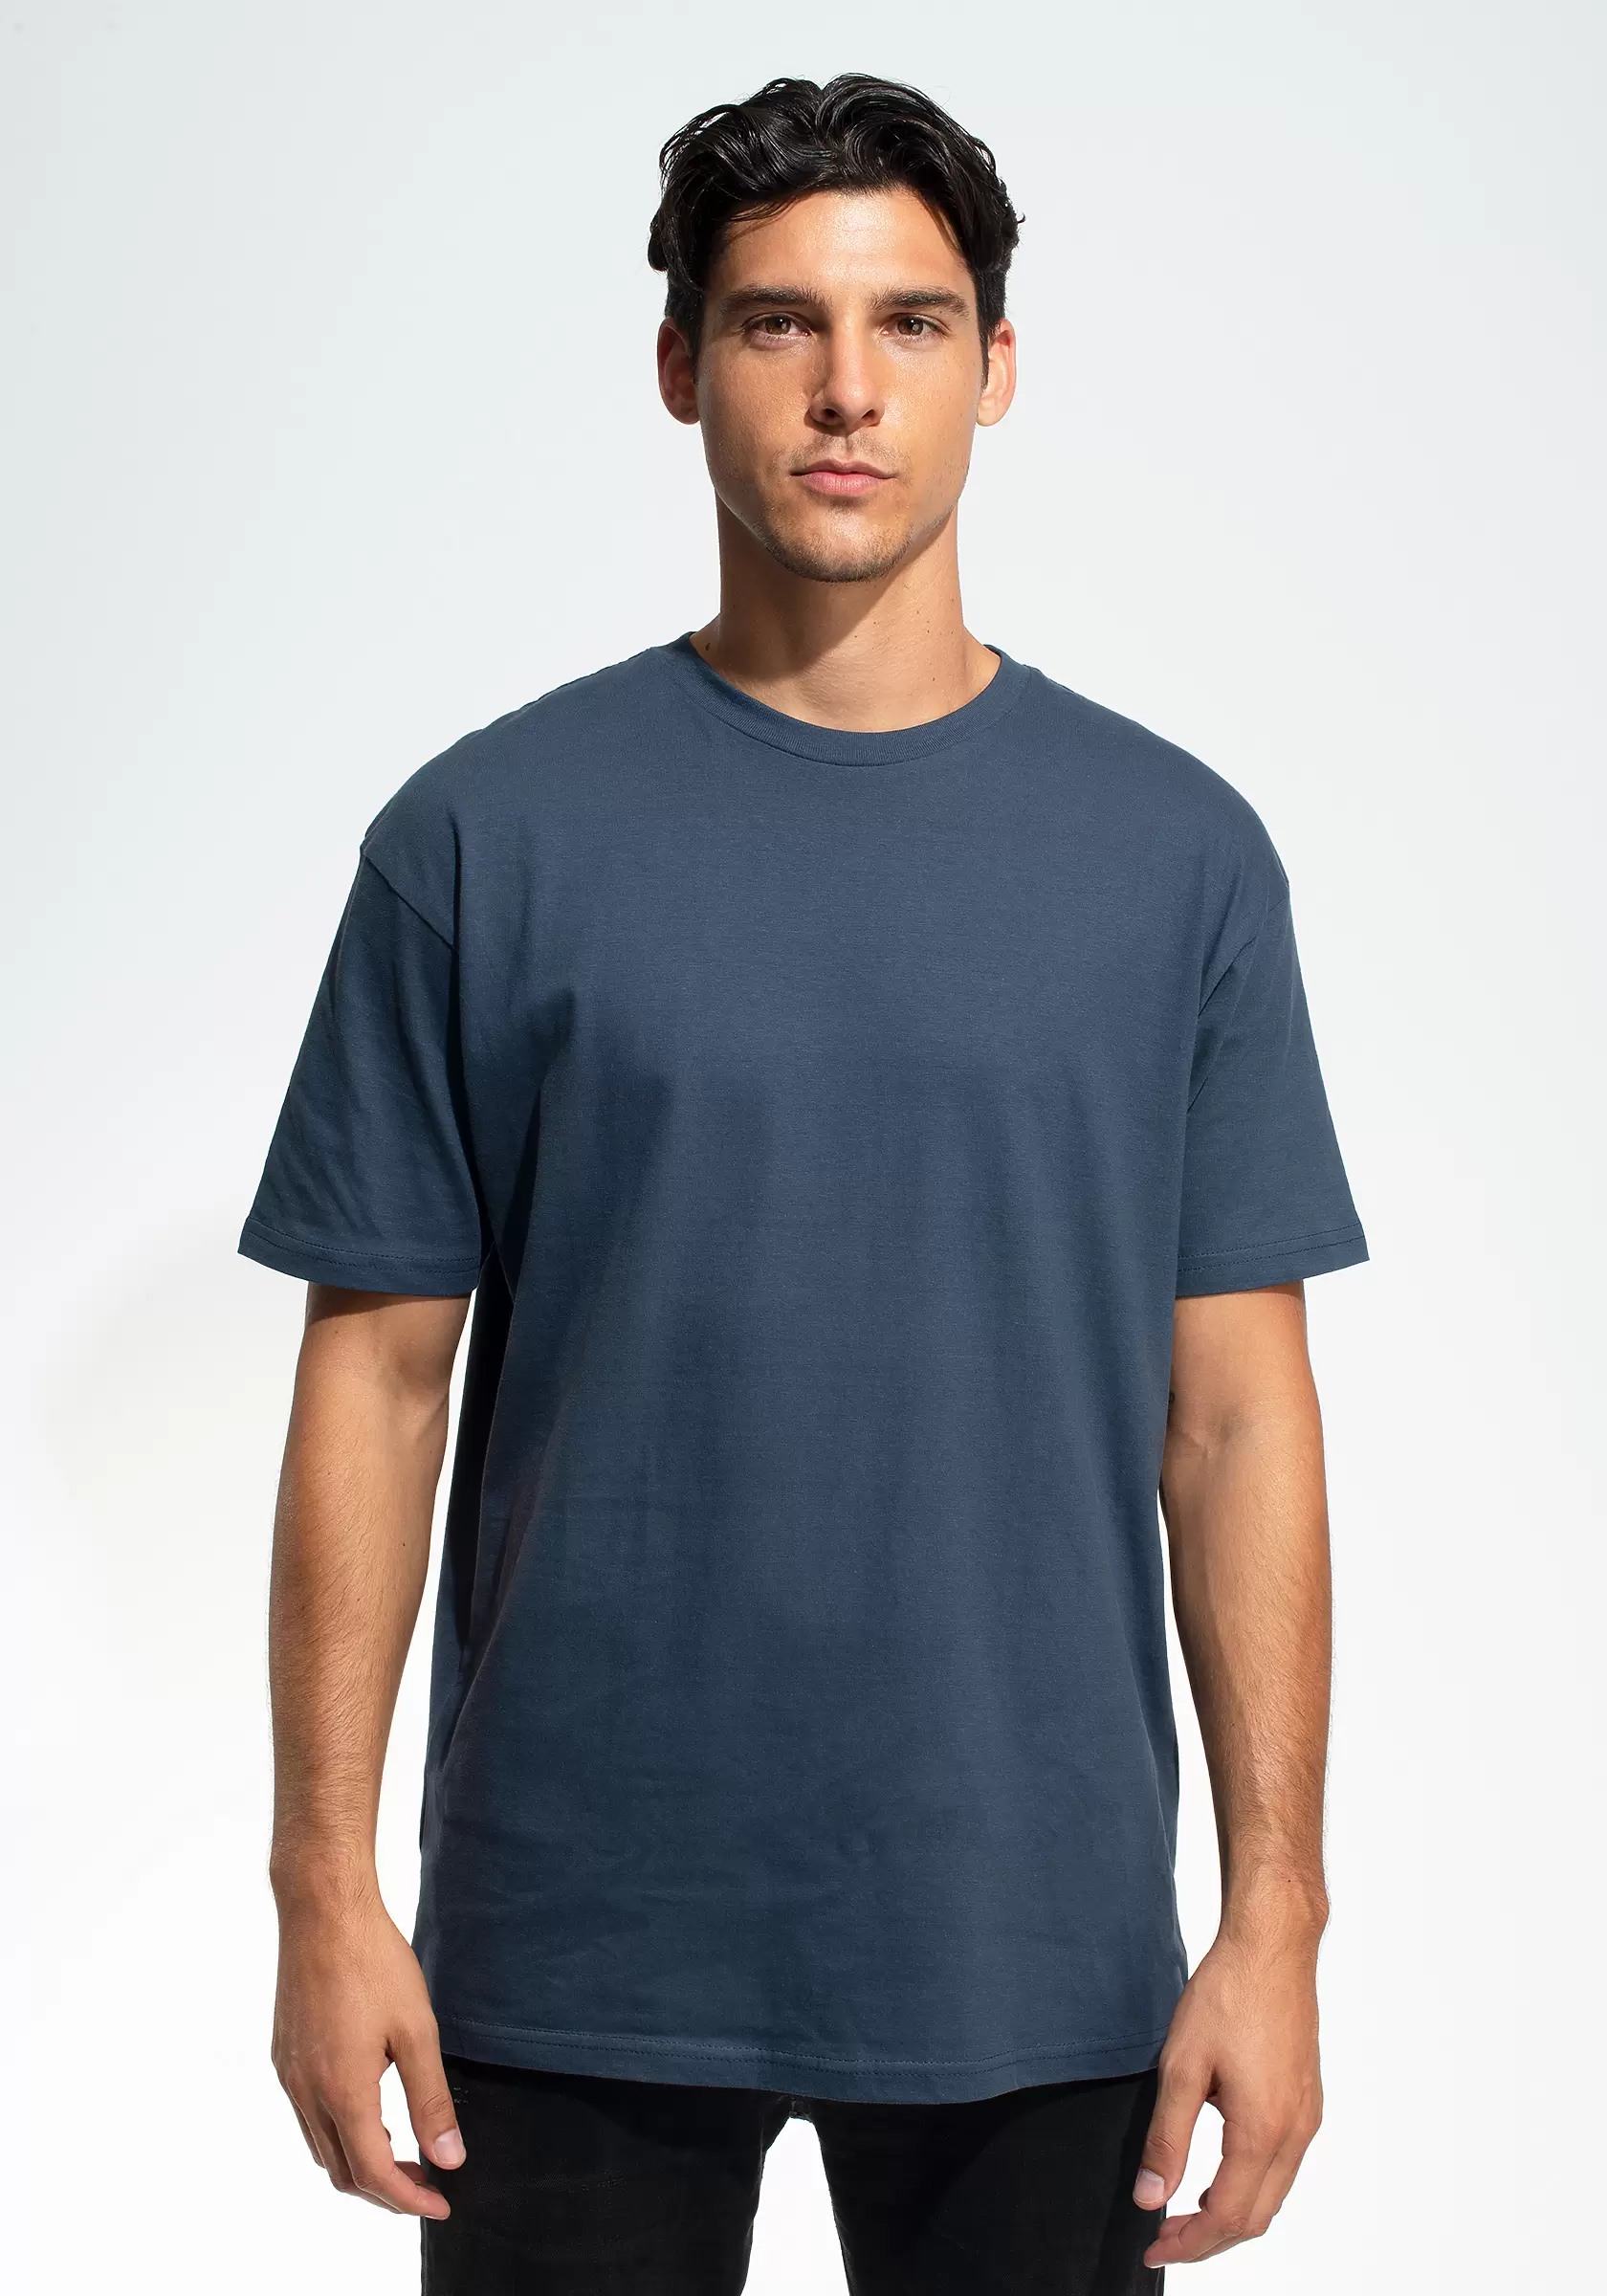 Cotton Heritage MC1086 Men’s Heavy Weight T-Shirt - From $6.28